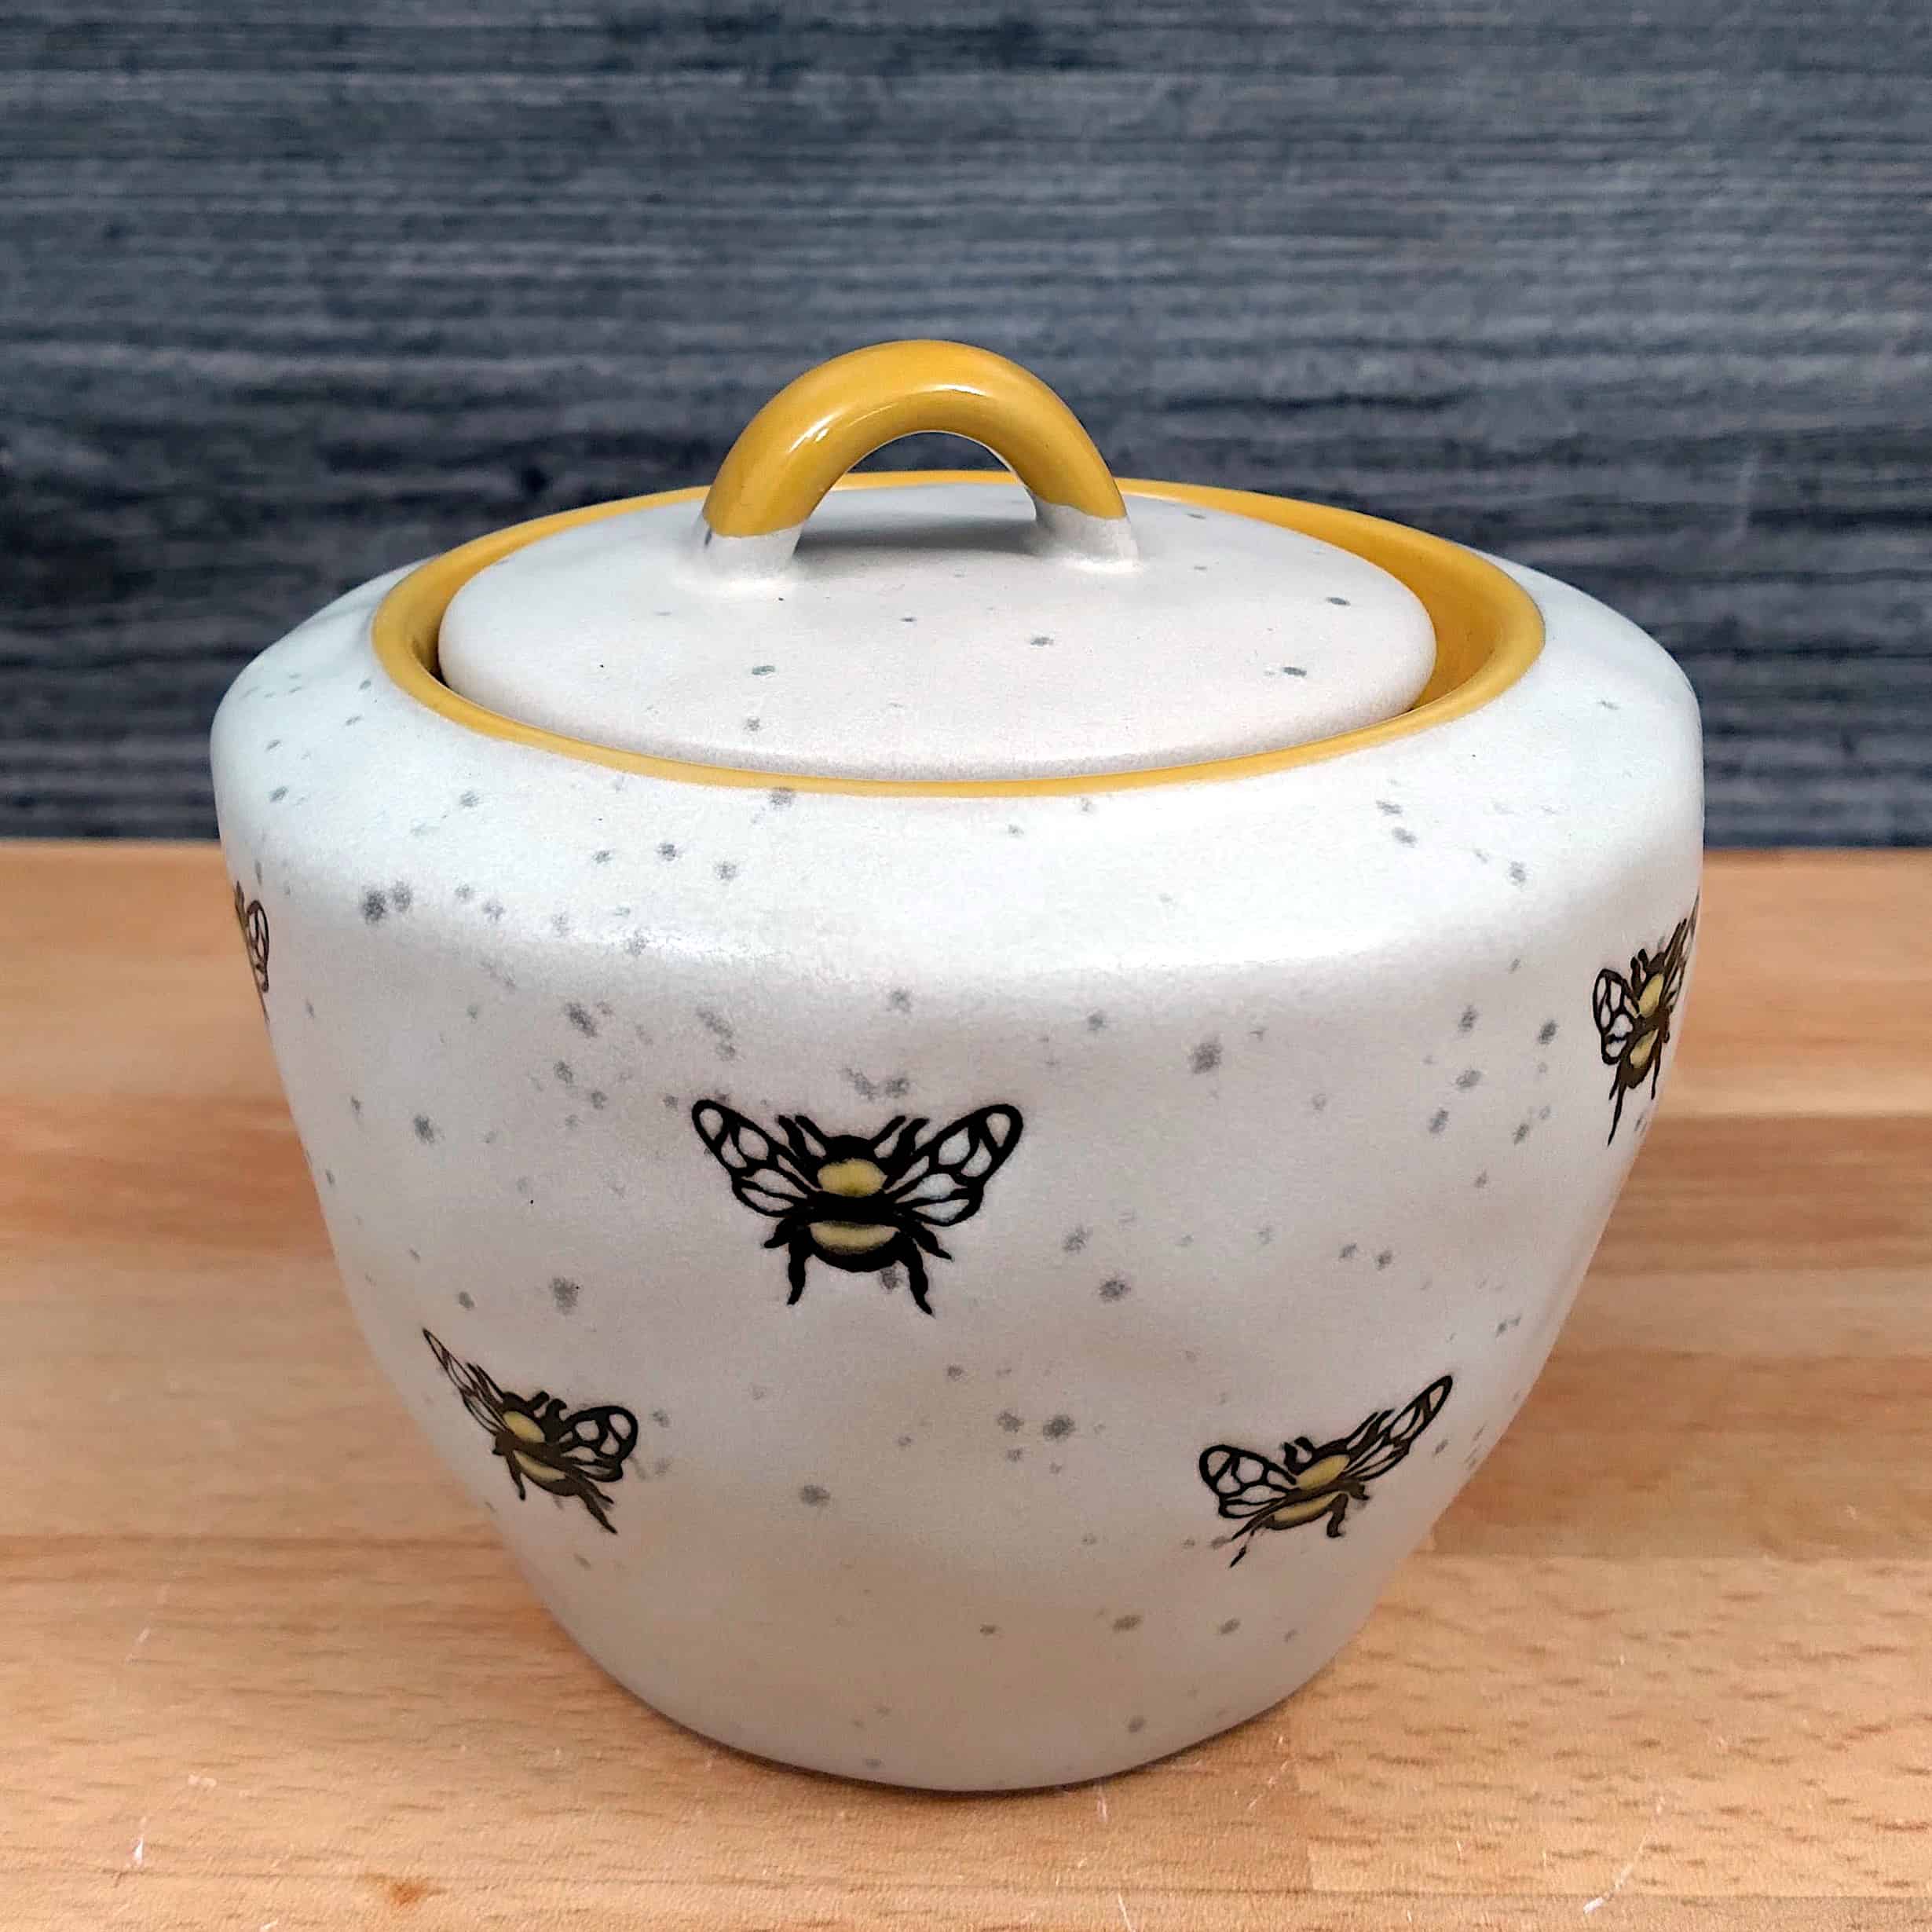 This Honey Bee Sugar Bowl and Creamer Set Decorative by Blue Sky is made with love by Premier Homegoods! Shop more unique gift ideas today with Spots Initiatives, the best way to support creators.